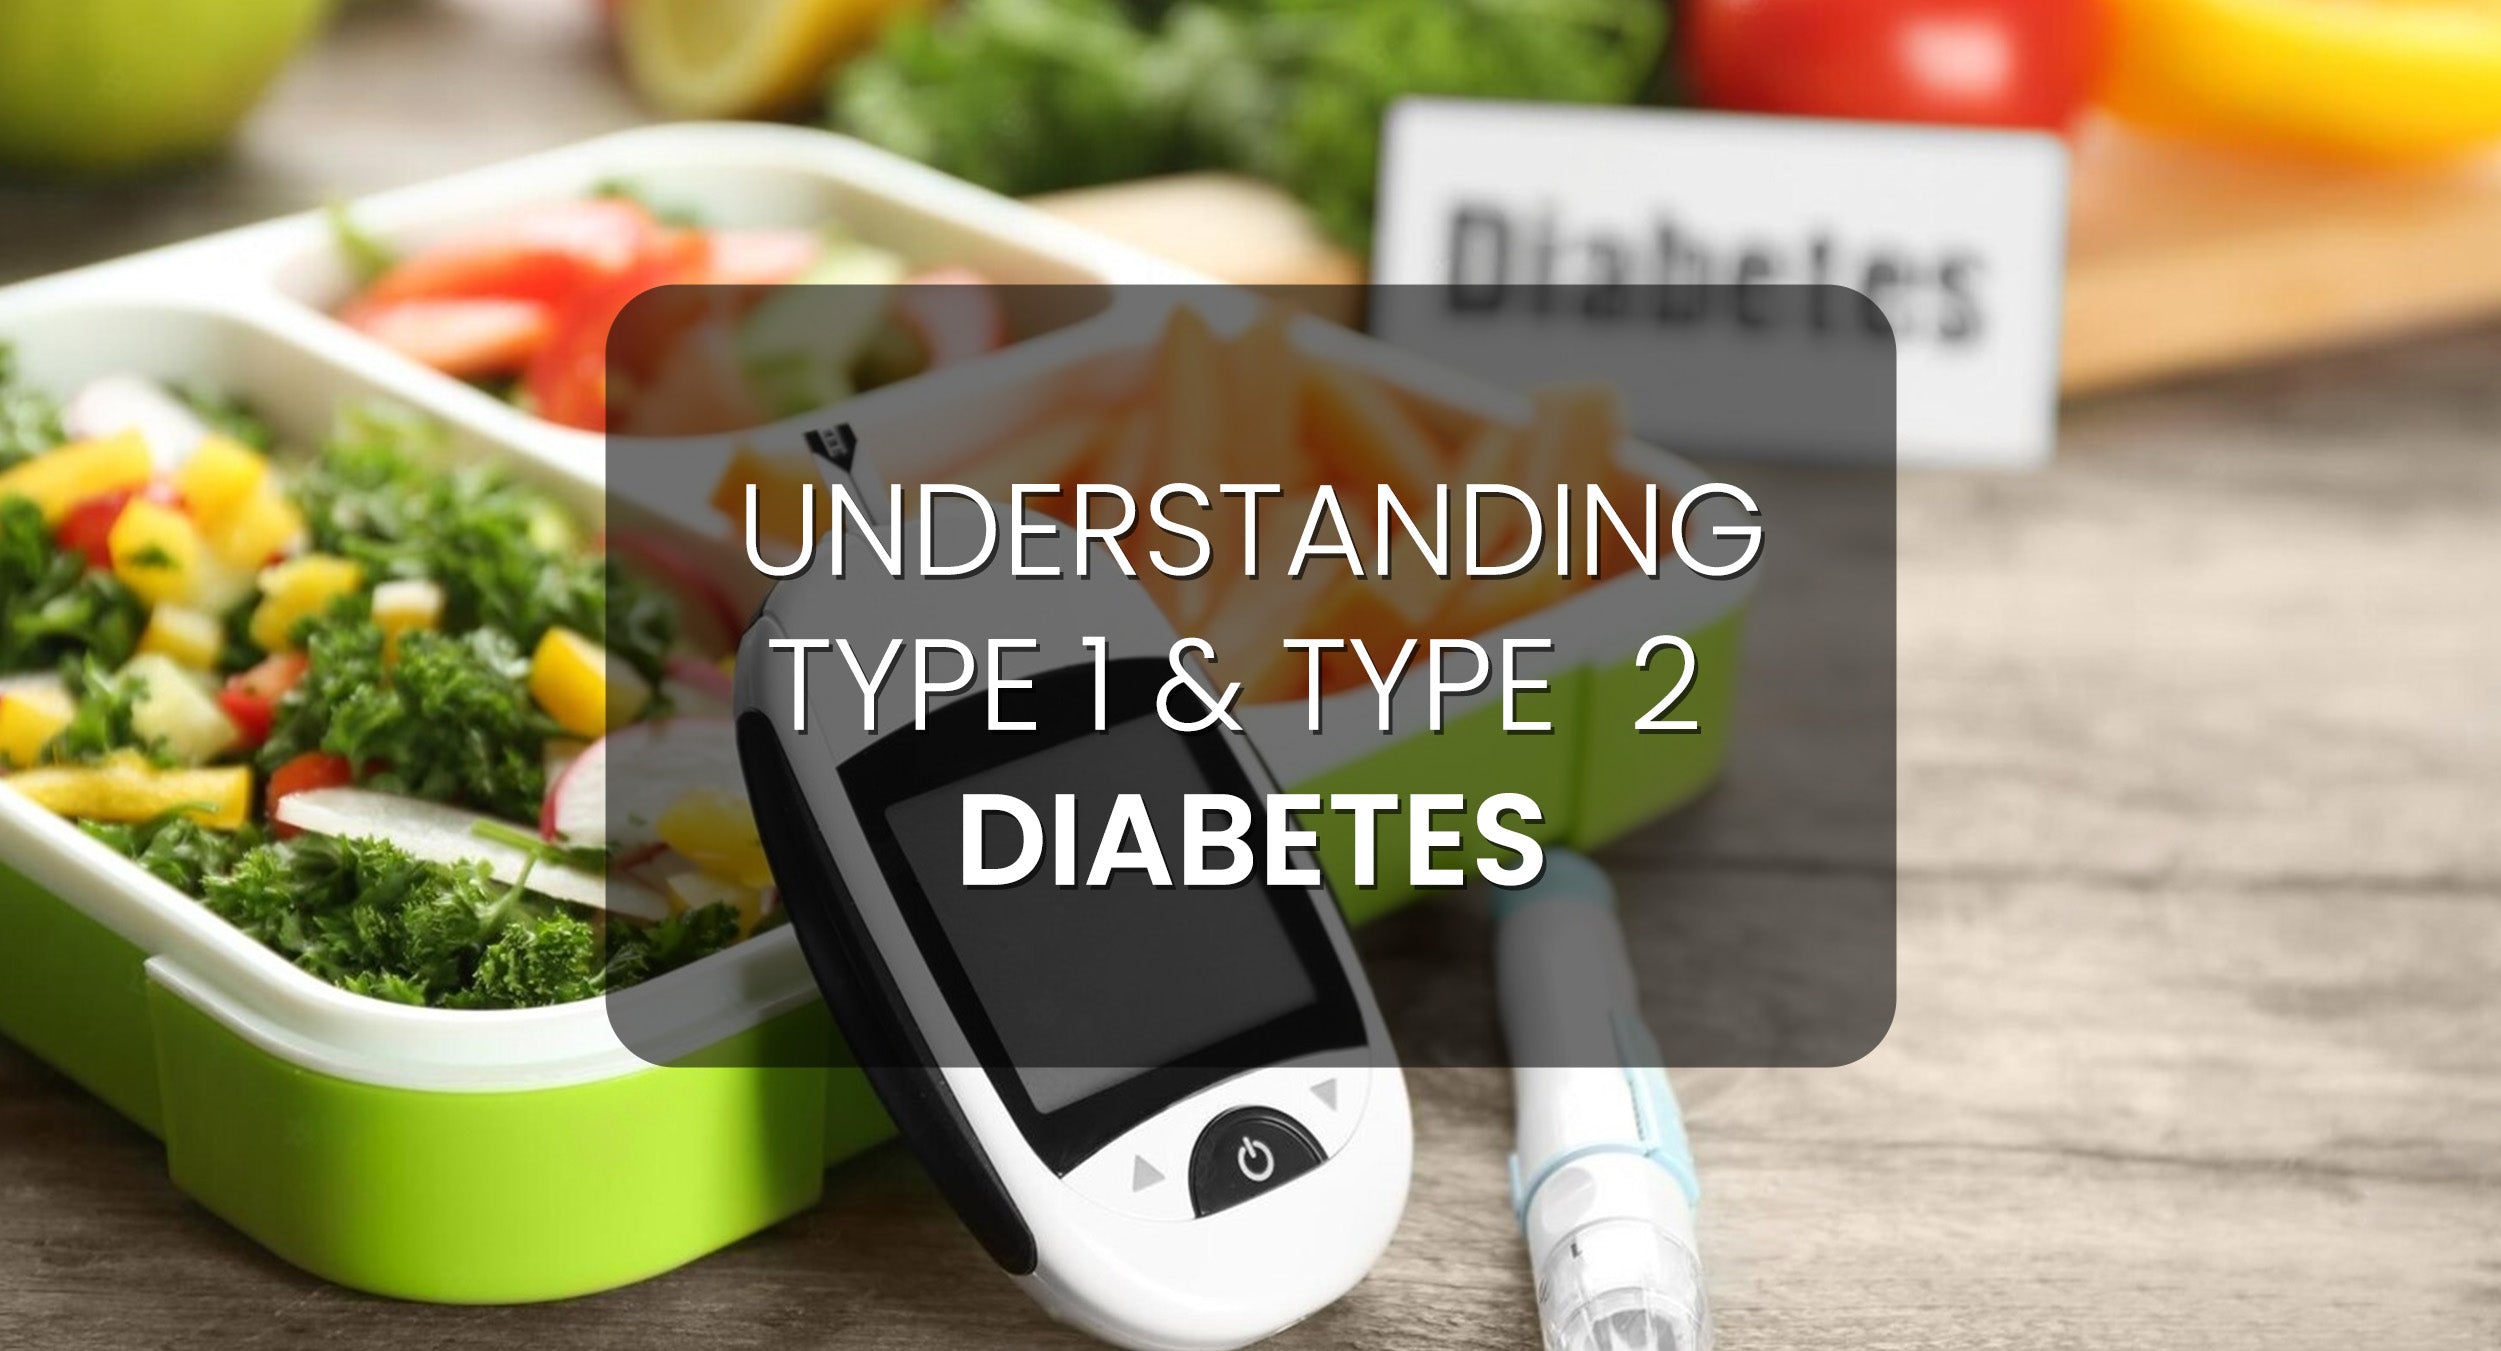 The Connection Between Type 2 Diabetes and Erectile Dysfunction